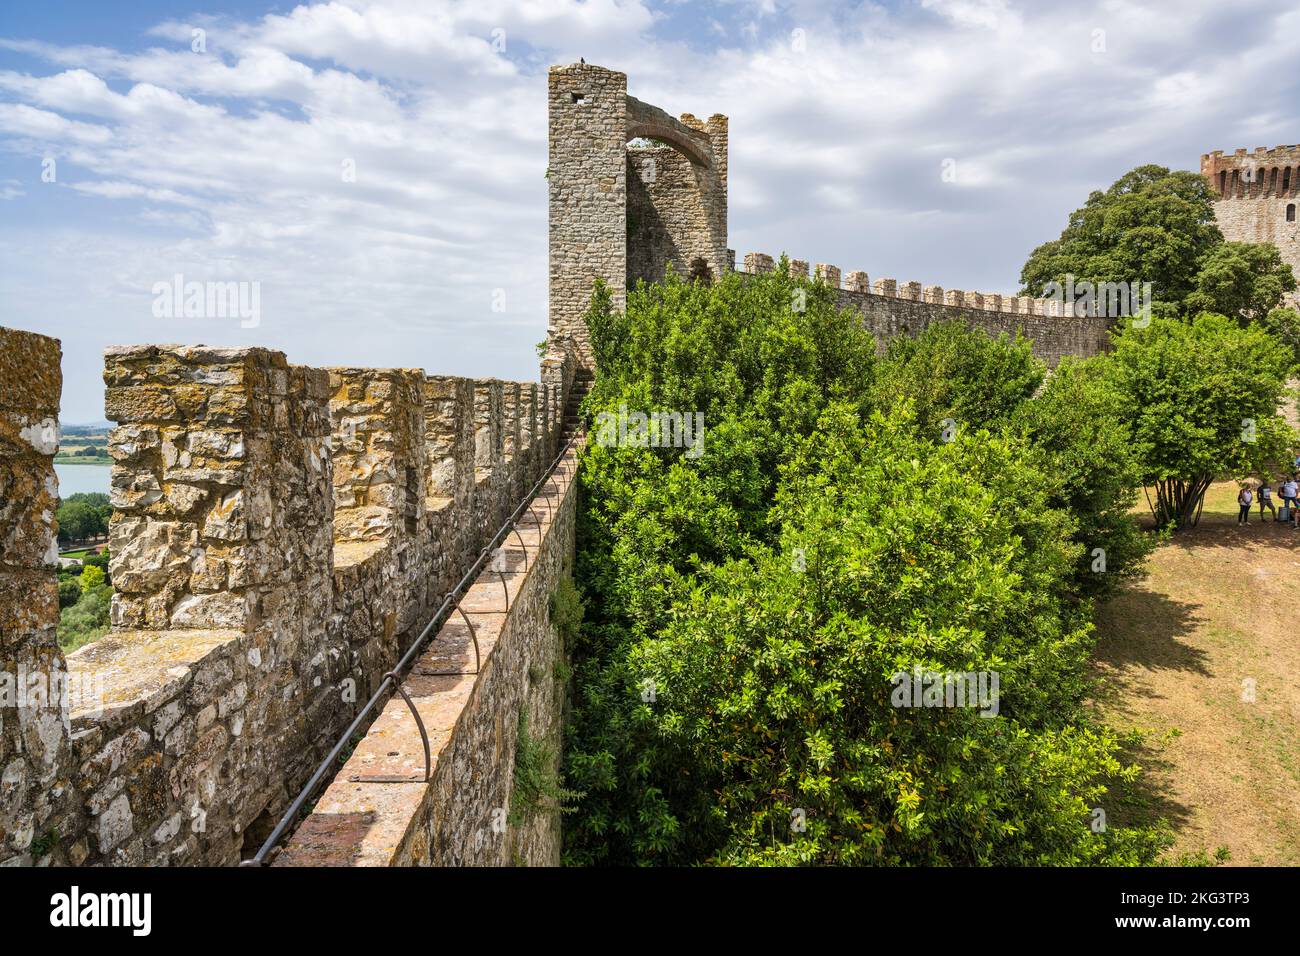 View along walkway on walls of Rocca del Leone (Fortress of the Lion) in historic old town of Castiglione del Lago, Province of Perugia, Umbria, Italy Stock Photo